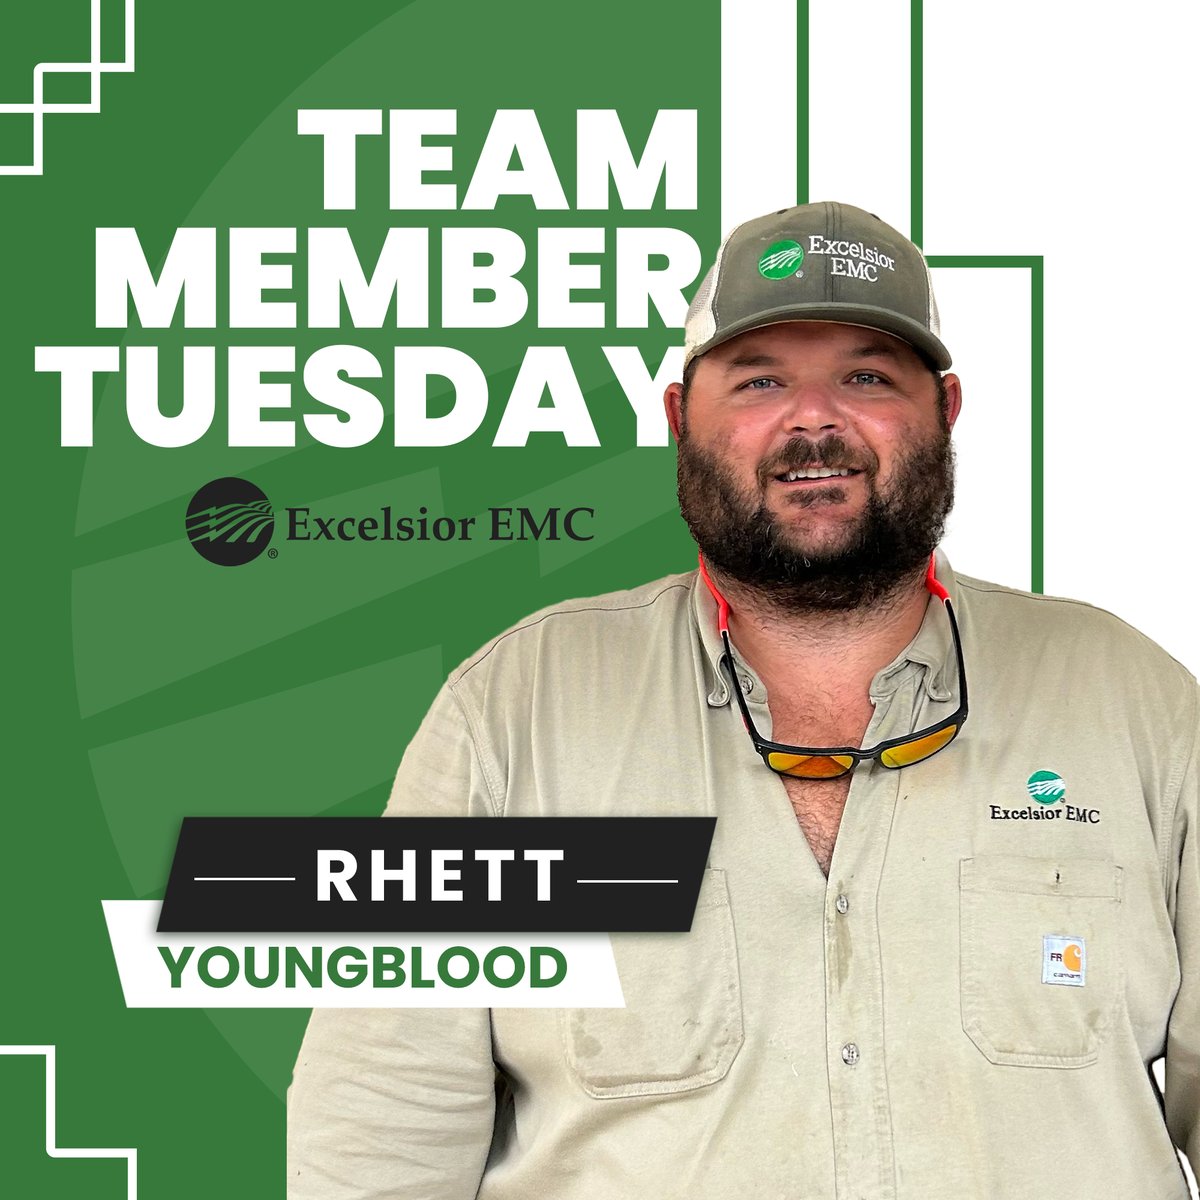 𝐓𝐞𝐚𝐦 𝐌𝐞𝐦𝐛𝐞𝐫 𝐓𝐮𝐞𝐬𝐝𝐚𝐲:

Rhett Youngblood has been at EEMC for 13 years. 

Rhett says, “I like working at Excelsior EMC because I have always liked building and making things work. I like the challenge that comes with the job and talking with the people that we  ...